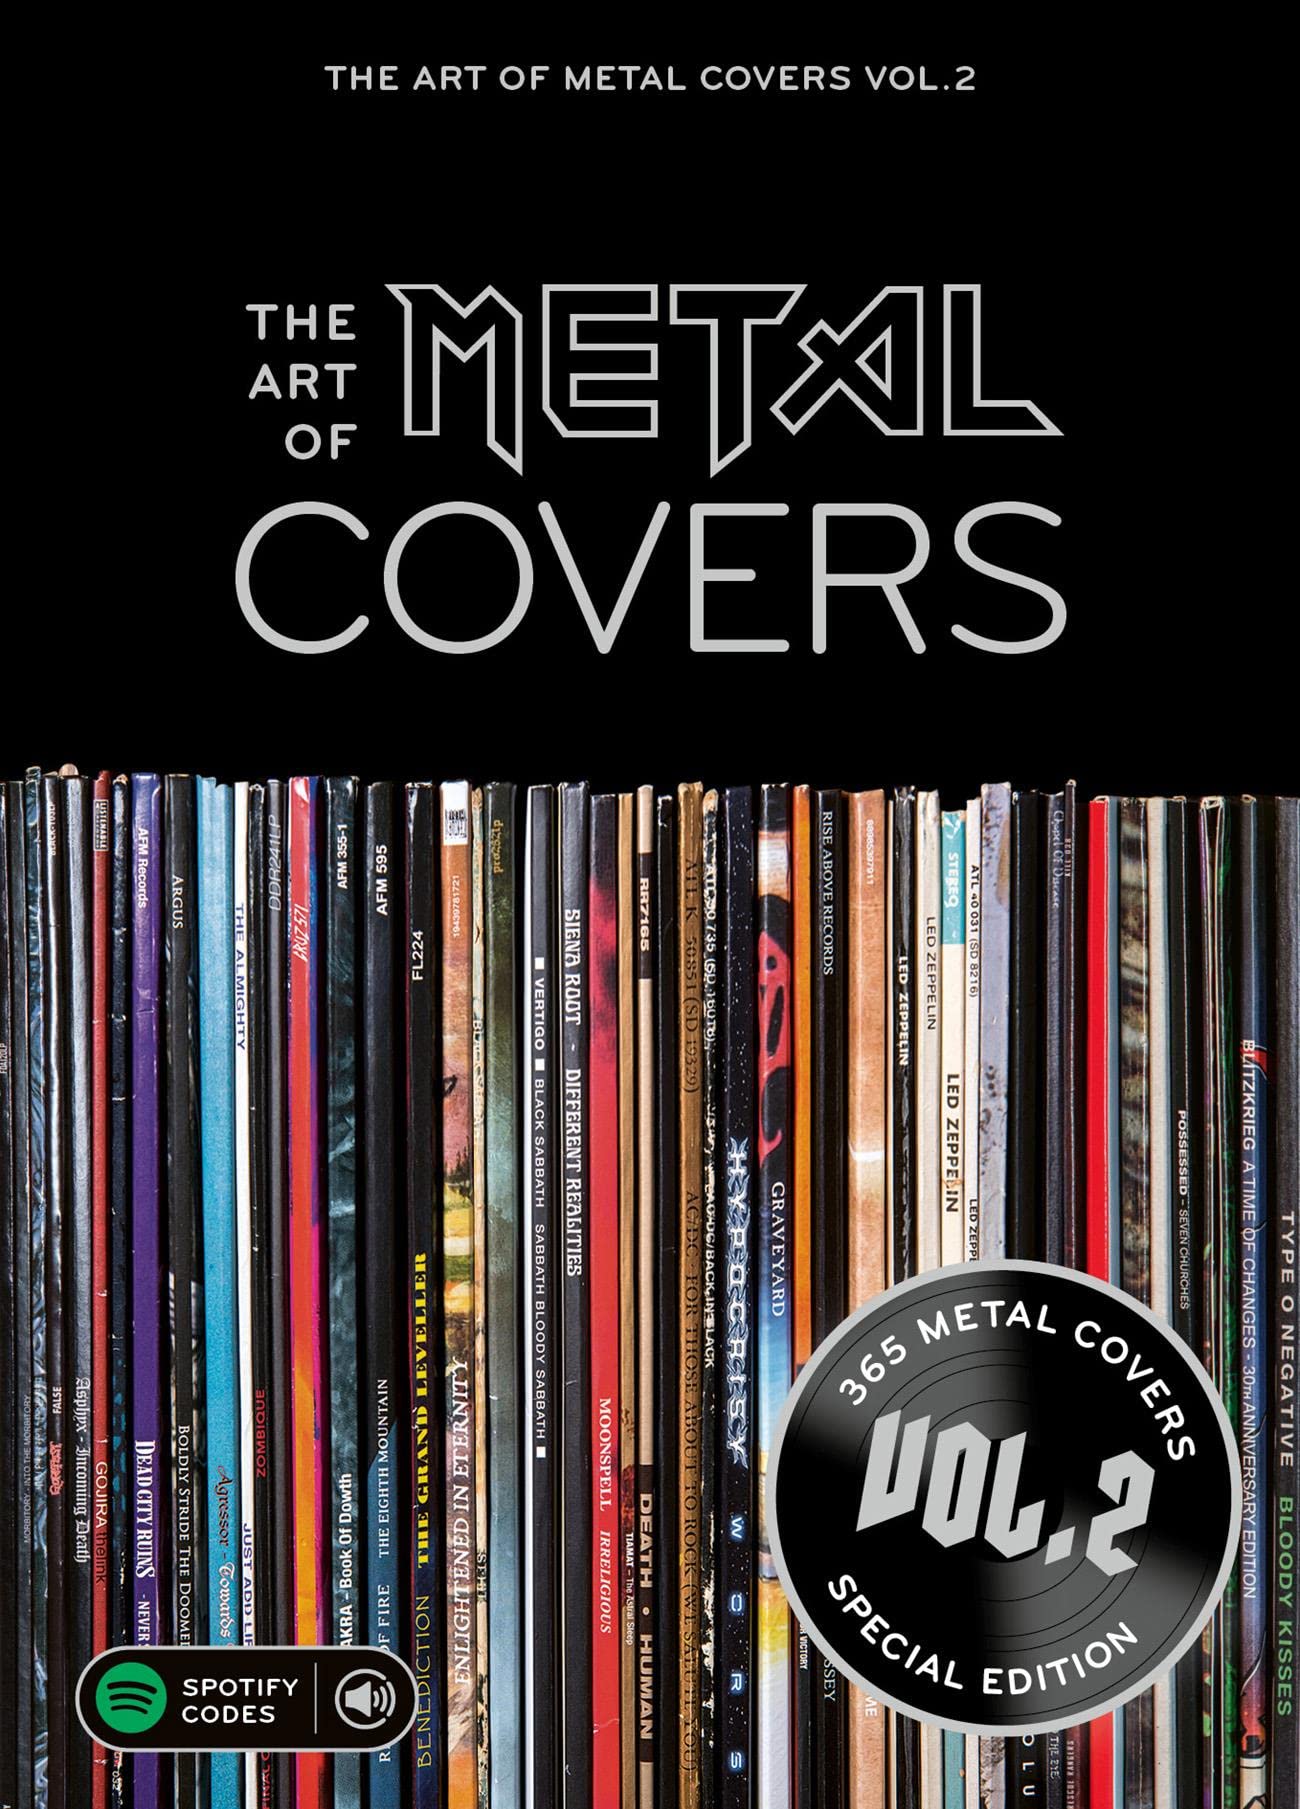 The Art of Metal Covers: Best-Of Collection Vol. 2